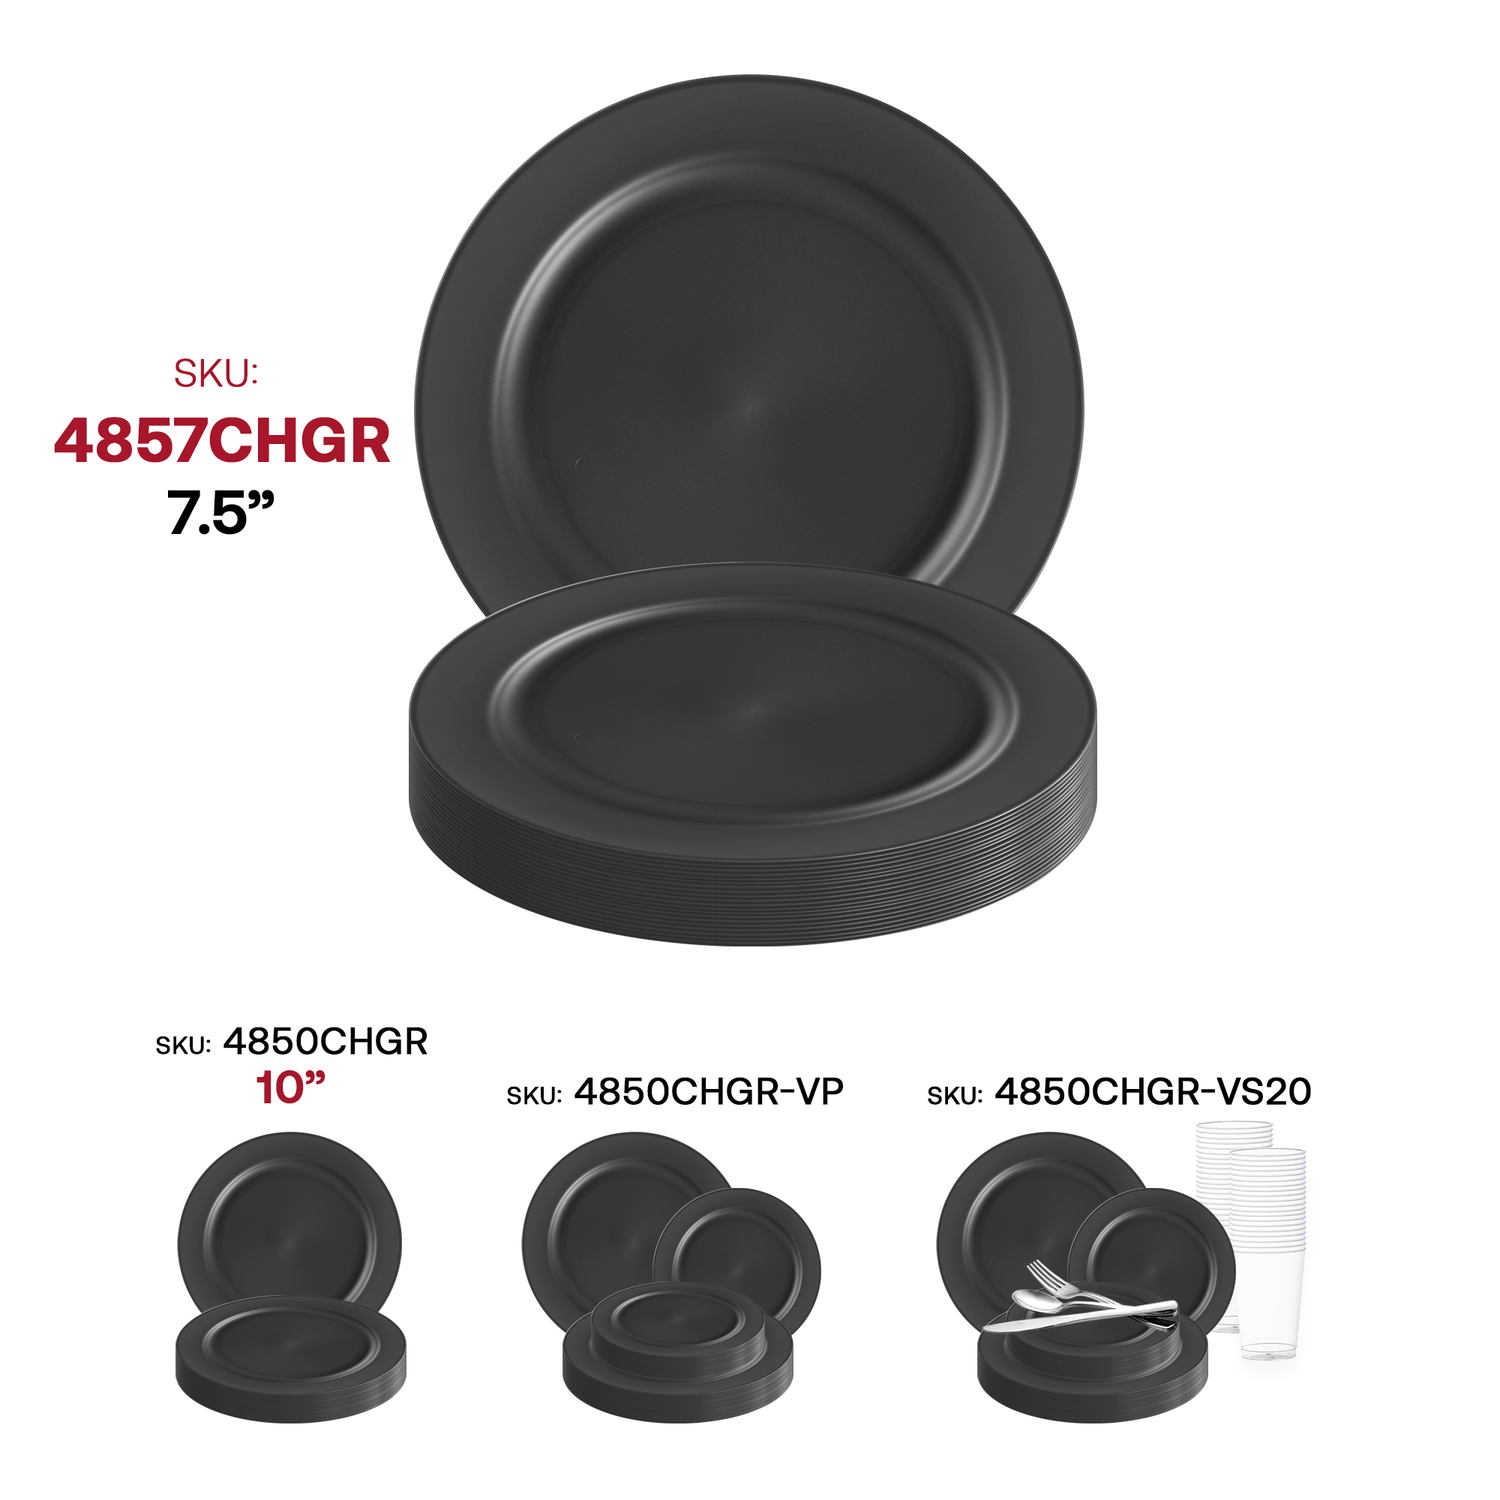 Matte Charcoal Gray Round Disposable Plastic Appetizer/Salad Plates (7.5") SKU | The Kaya Collection